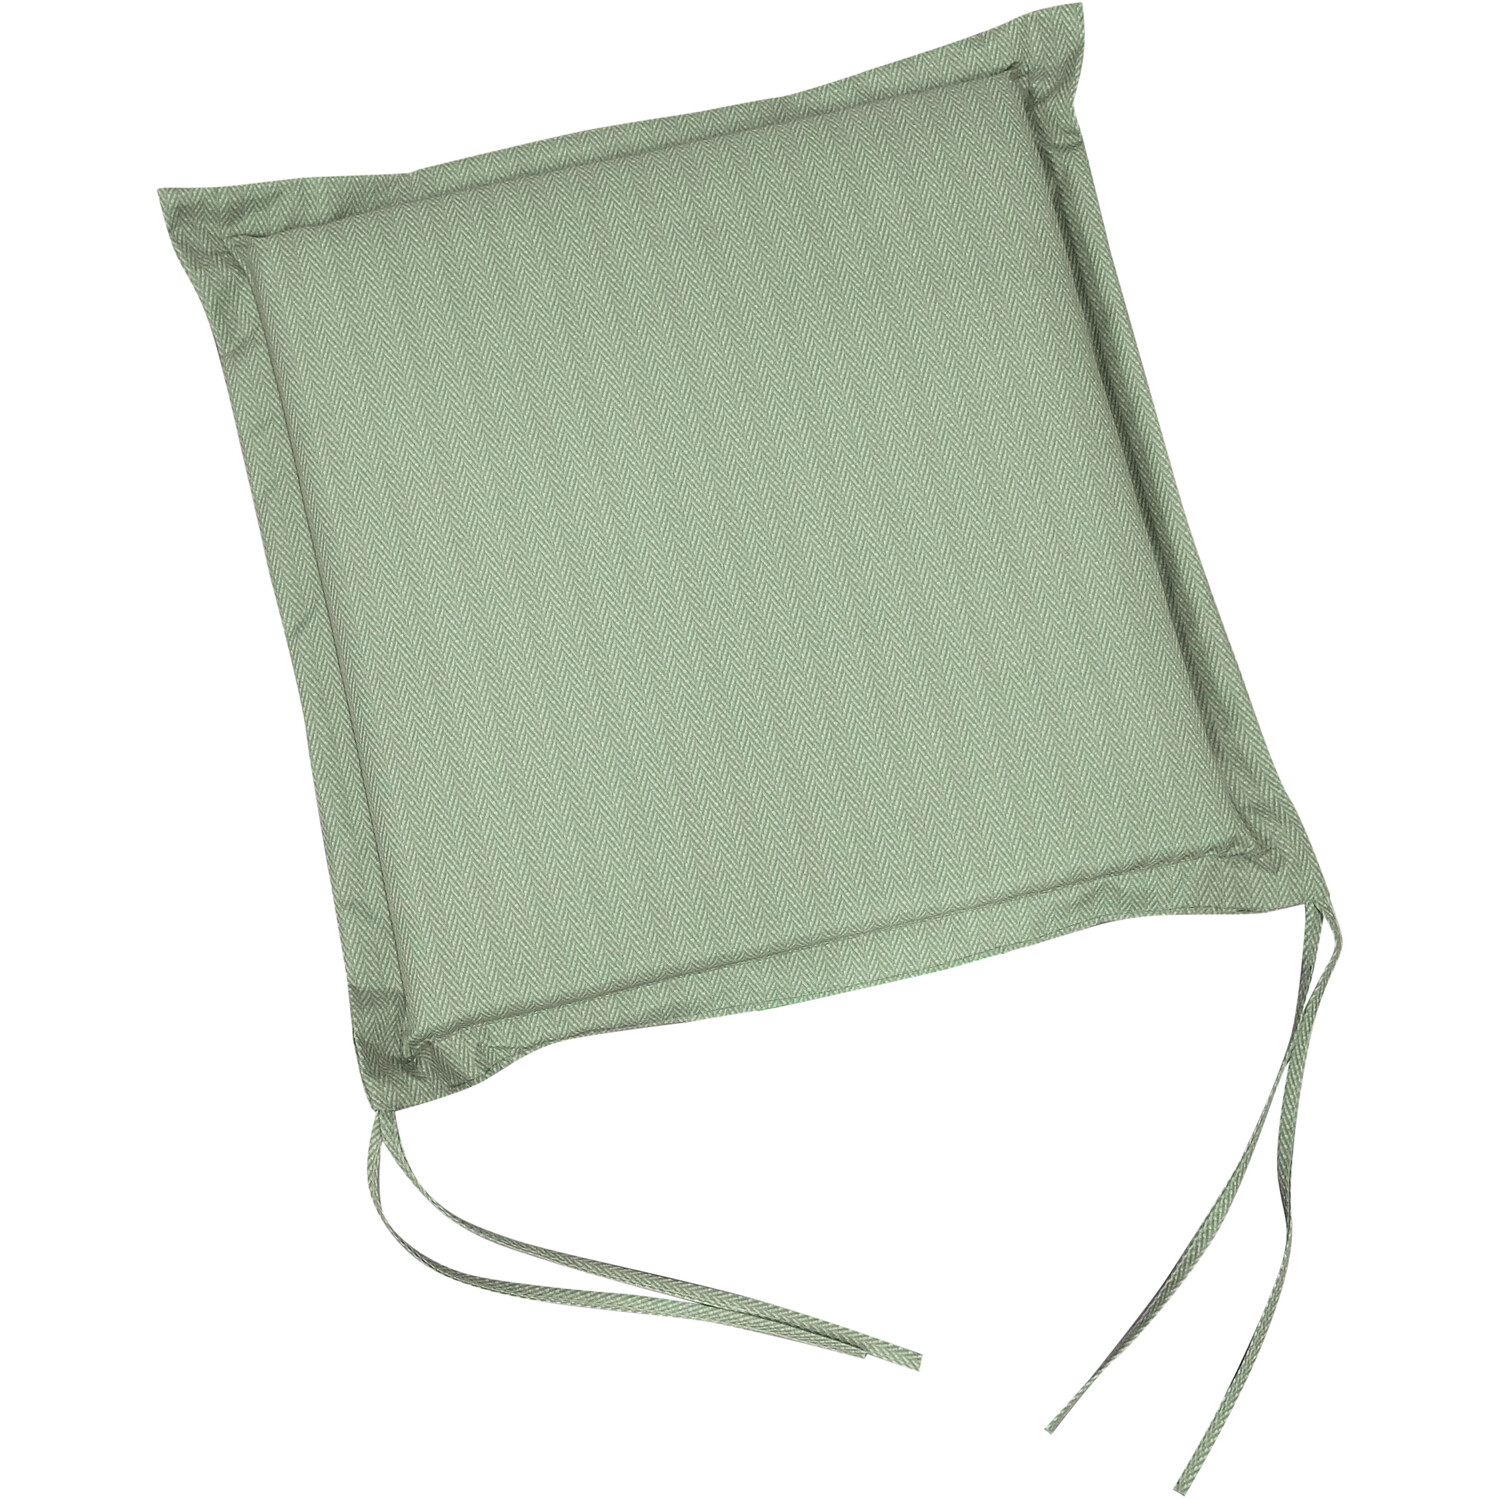 Malay Pack of 2 Seat Pads - Green Image